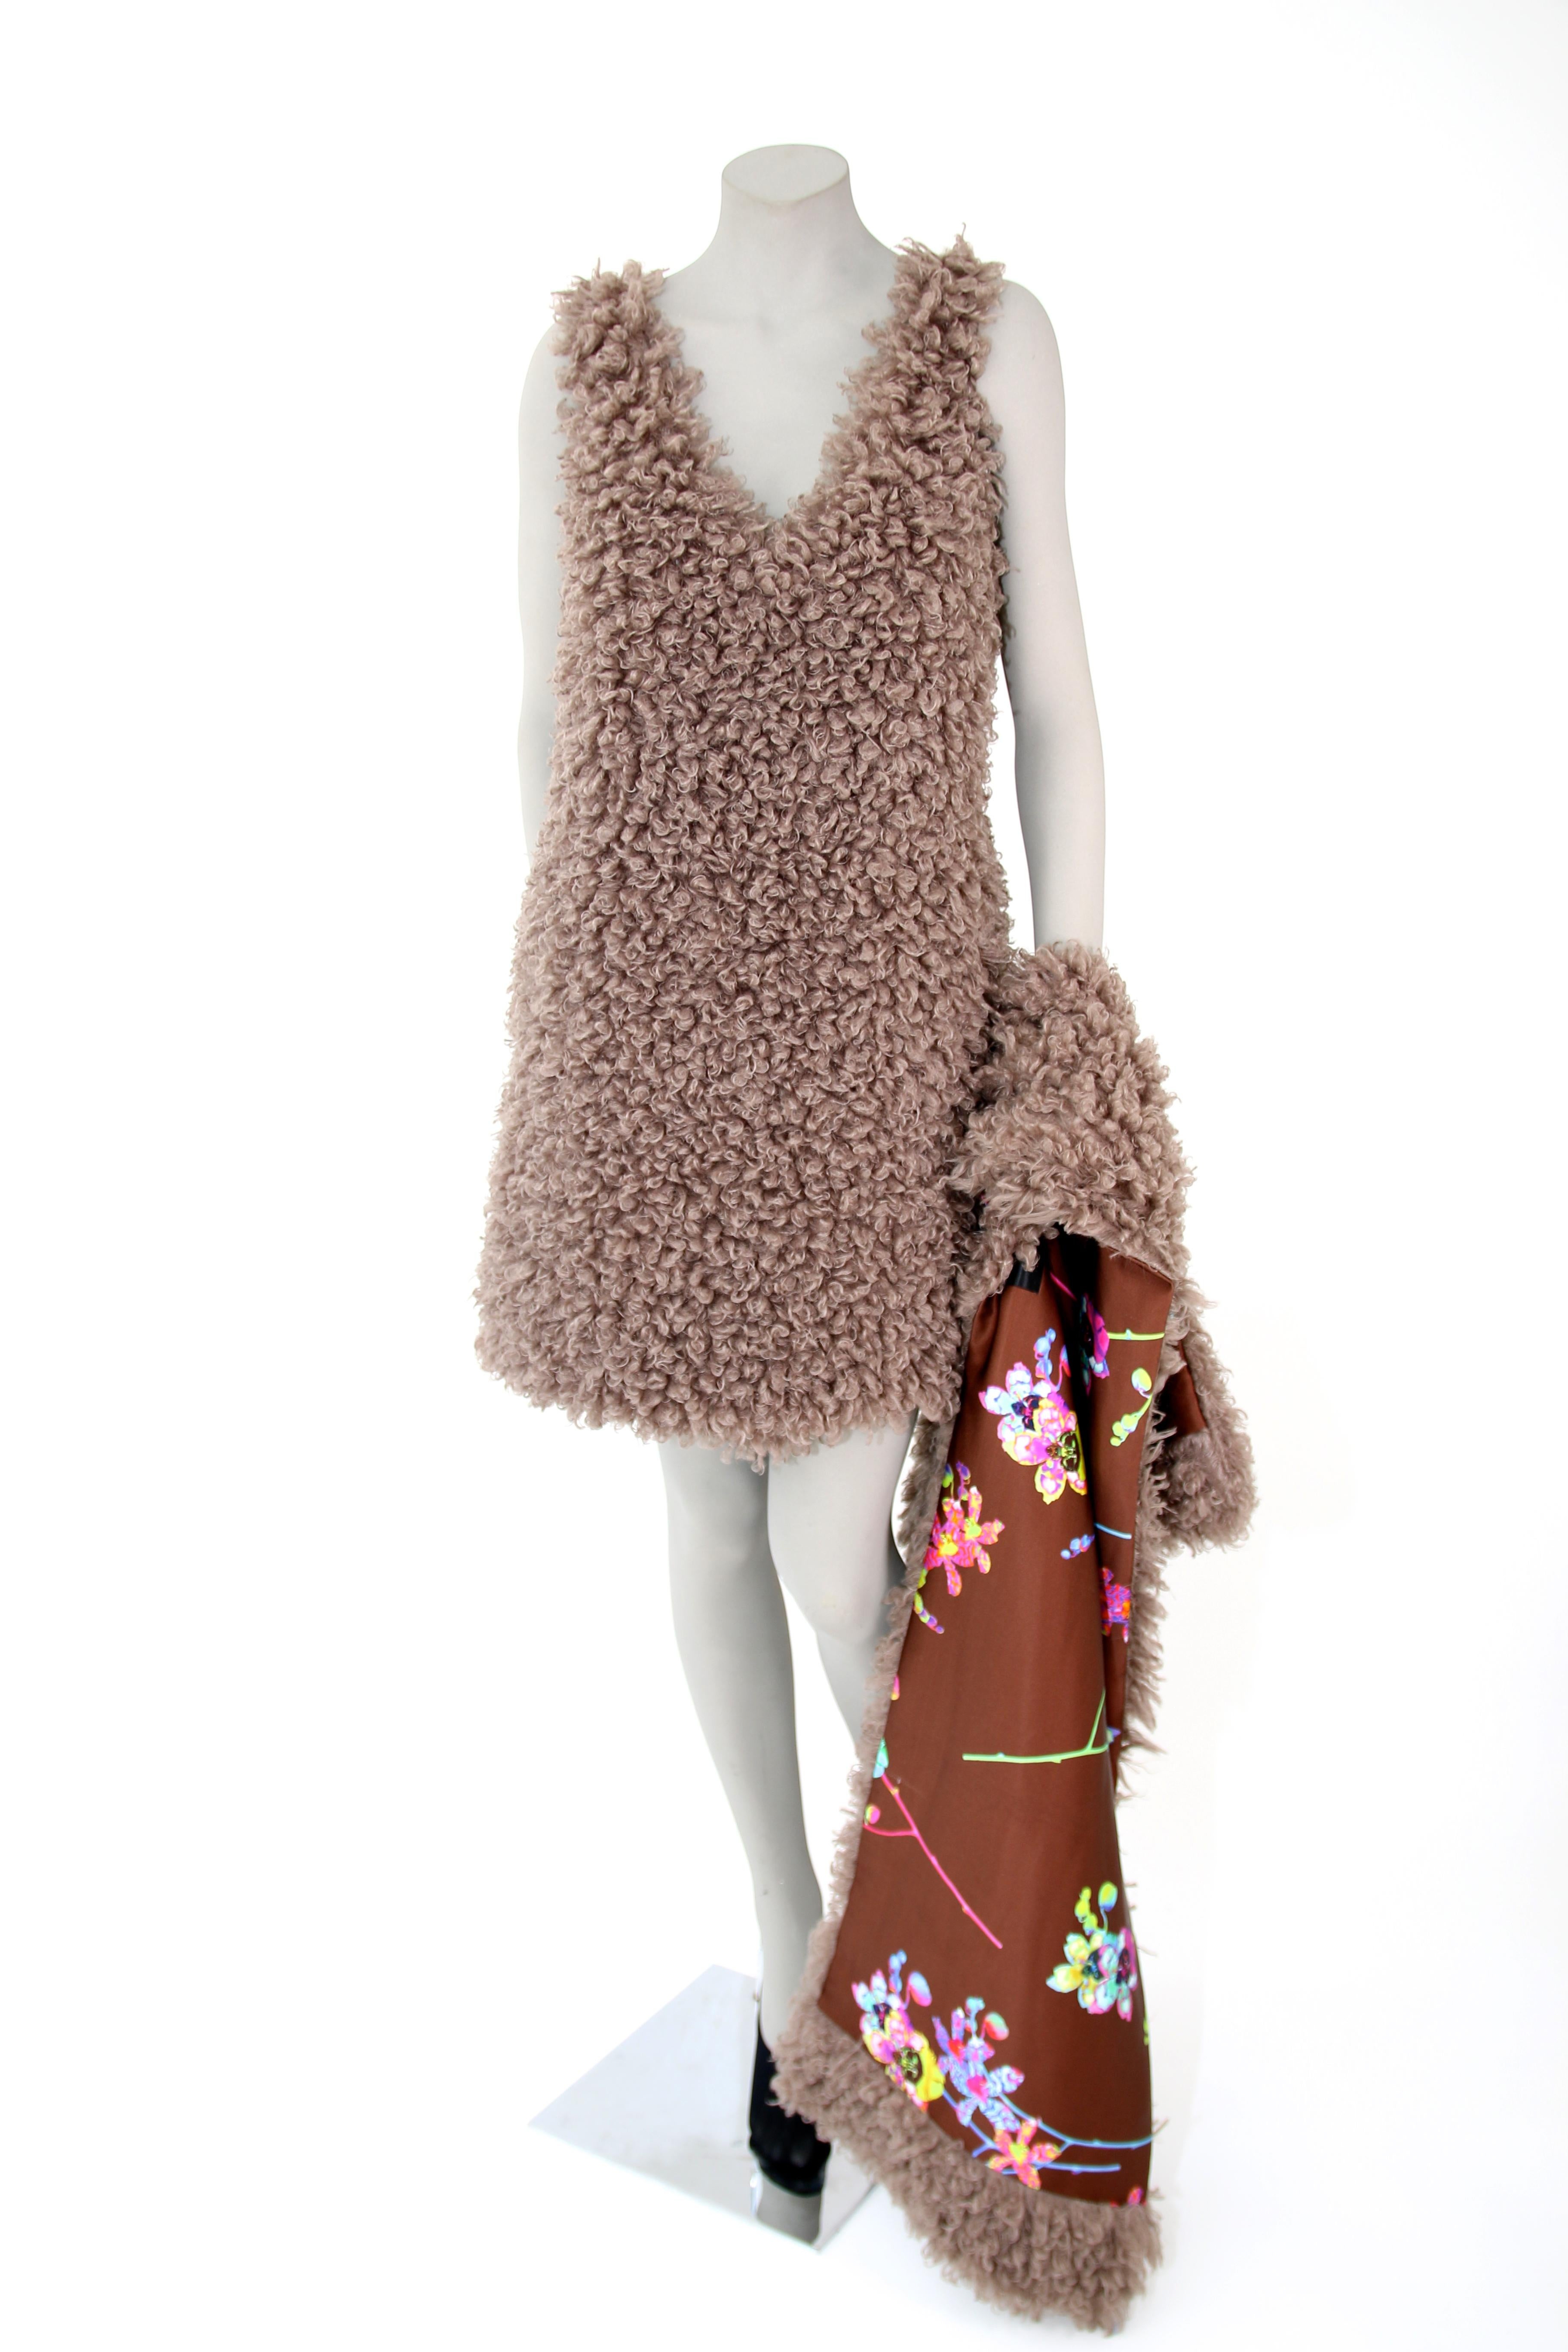 Pelush Faux Fur Curly Boucle' Poodle Coat - Small  In New Condition For Sale In Greenwich, CT